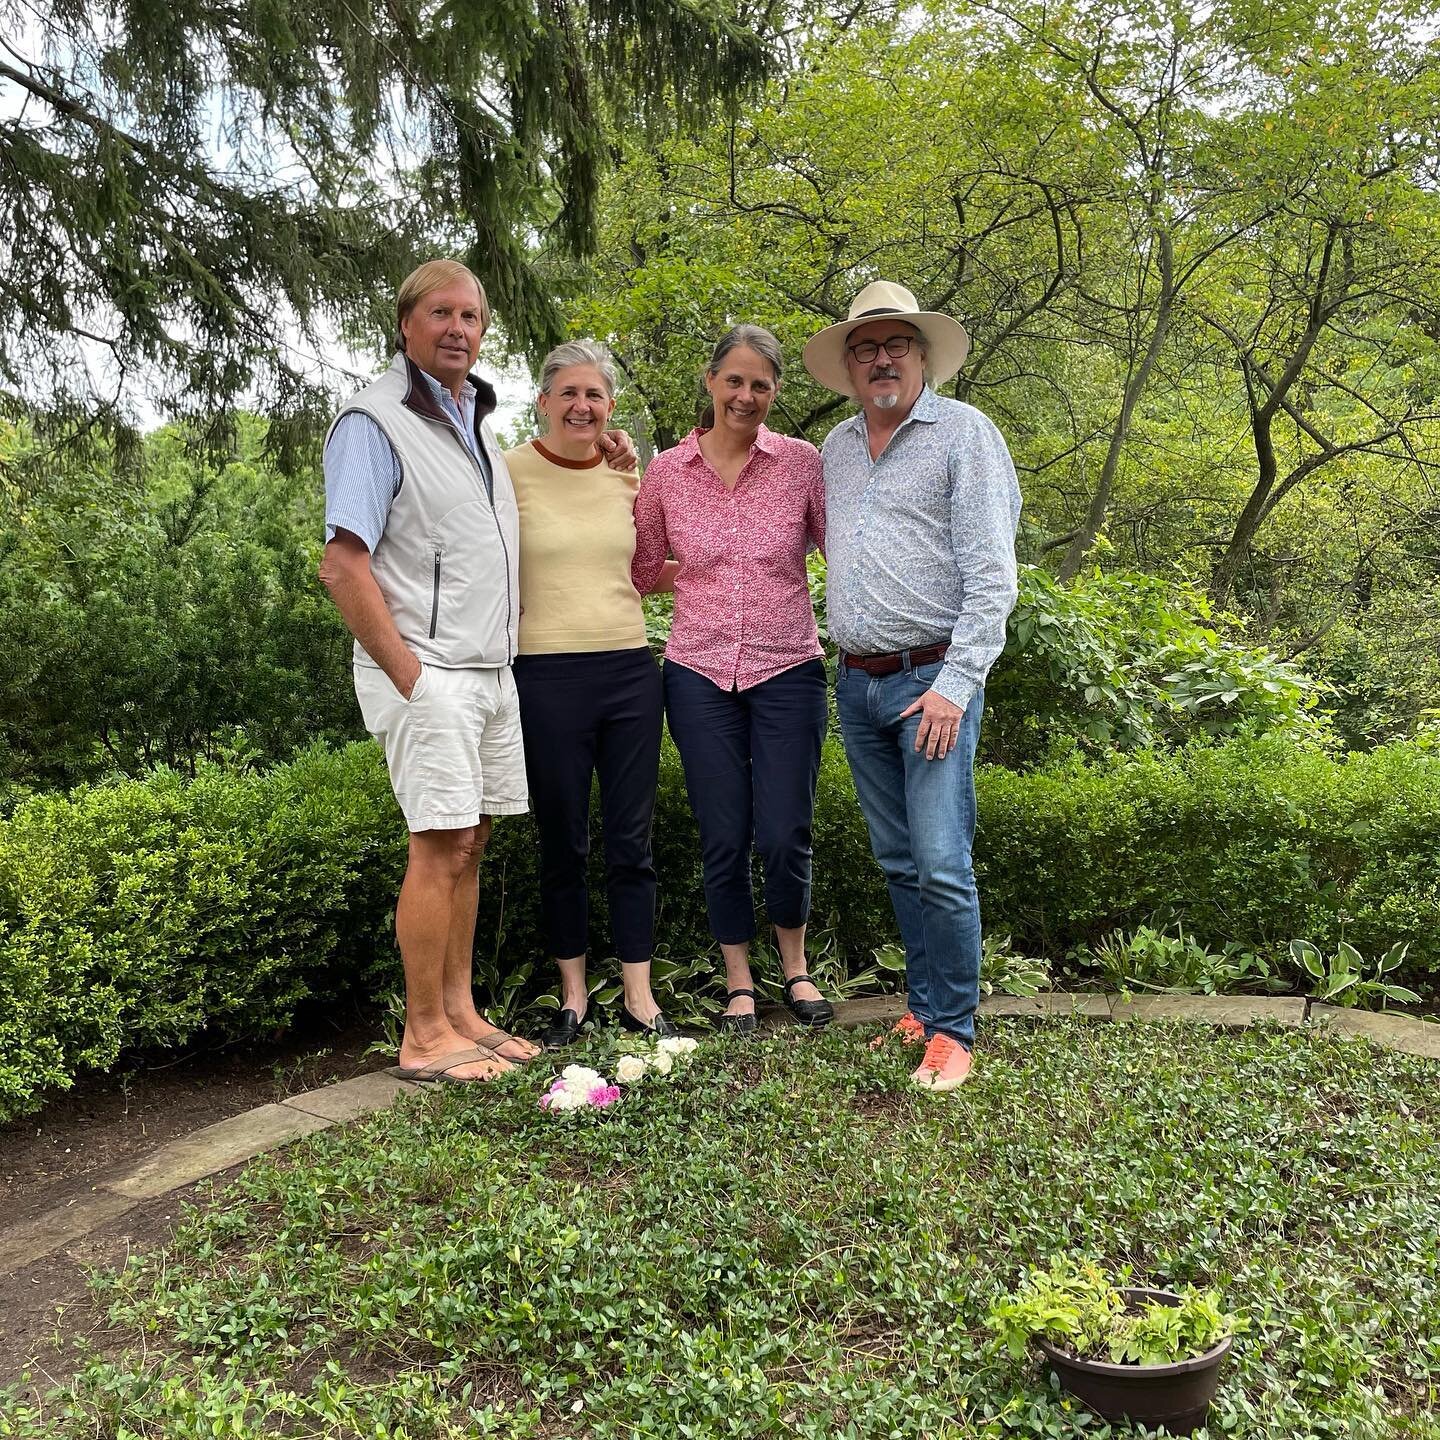 07.22.21: We interred our mom&rsquo;s ashes today at Christ Church Cranbrook. She loved the grounds of Cranbrook and Kingswood. After sixteen months of waiting until we could all be together again, it&rsquo;s wonderful to know that she is now resting